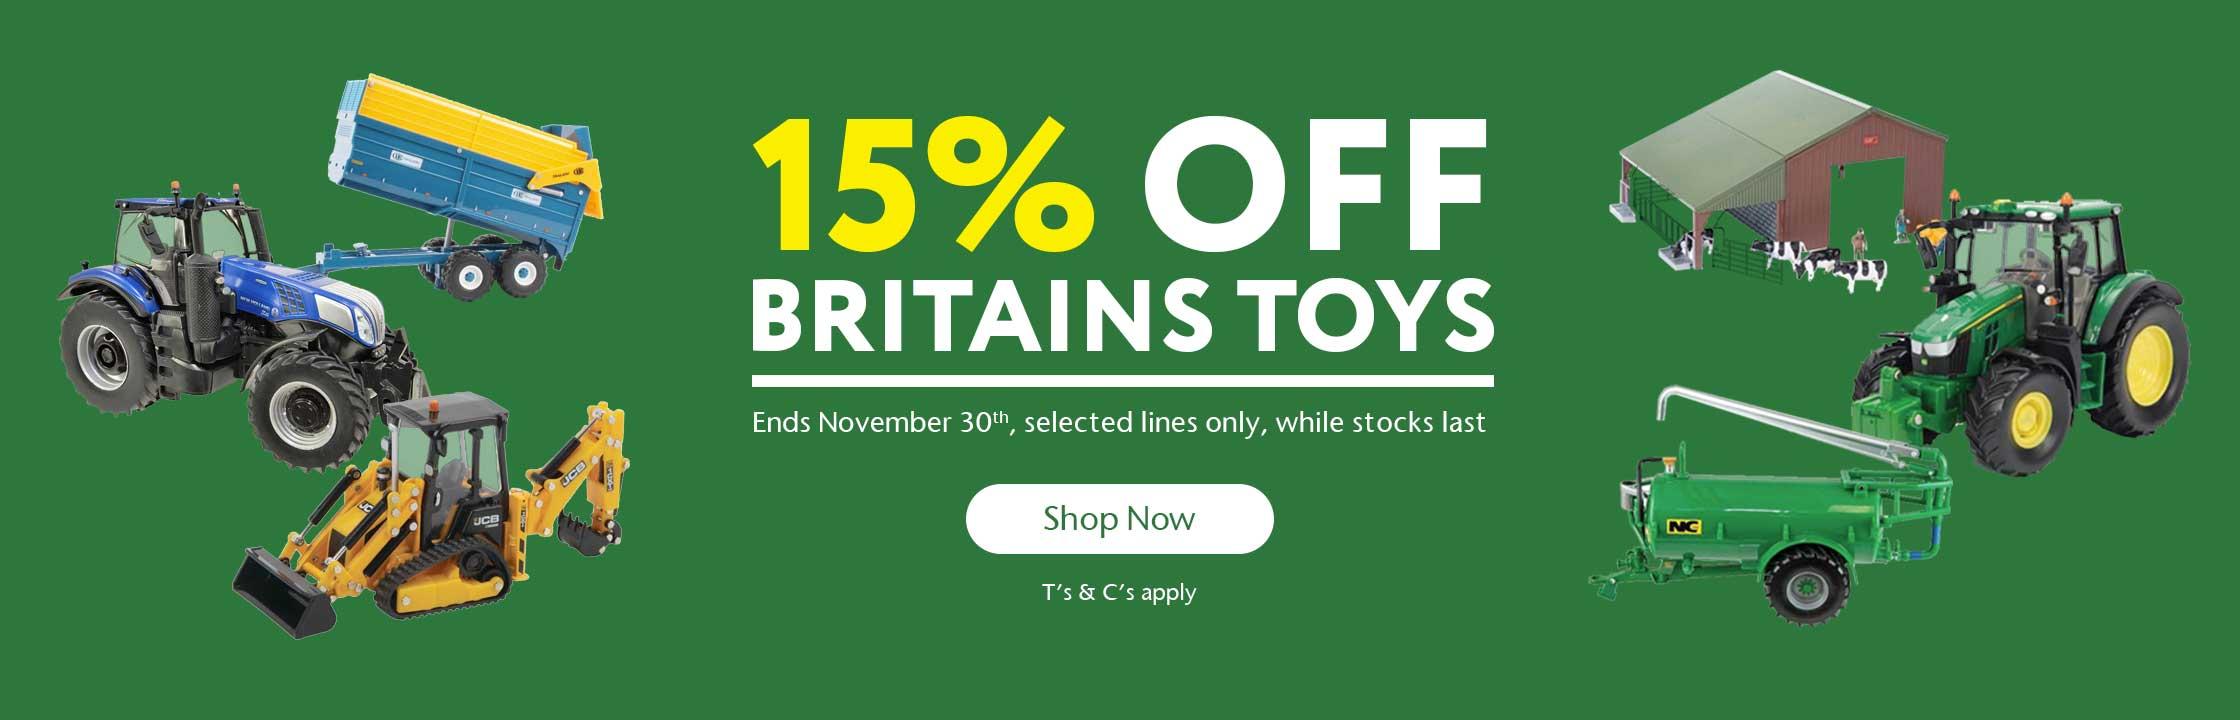 15% OFF Britains Toys